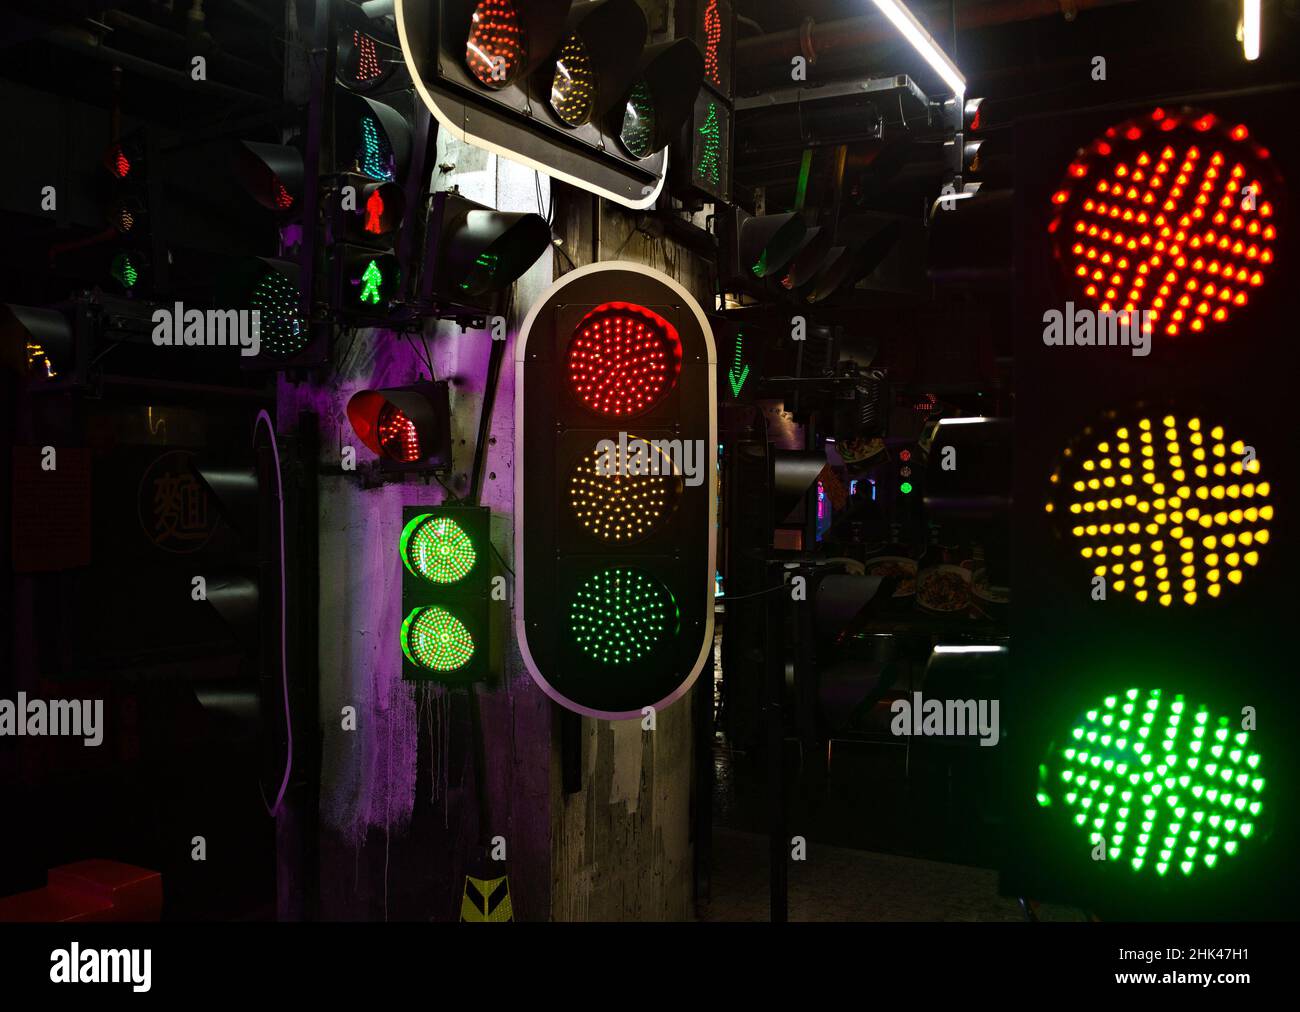 Red yellow green lights simultaneously lit in display of multiple traffic lights Stock Photo